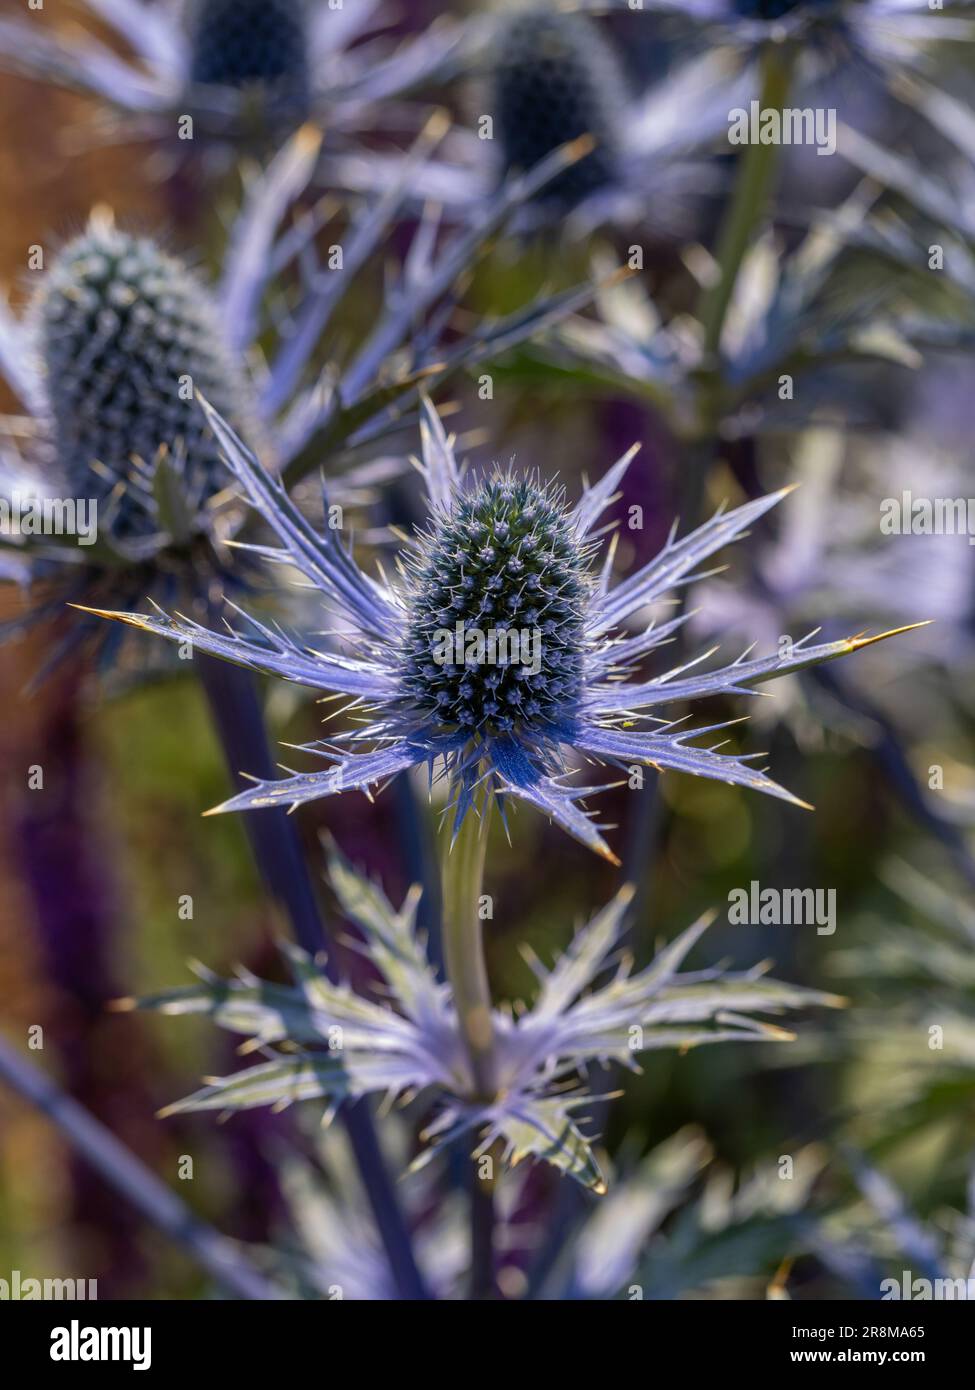 Close-up of the blue spiky flowers of Eryngium x zabelii 'Big Blue' growing in a UK garden Stock Photo